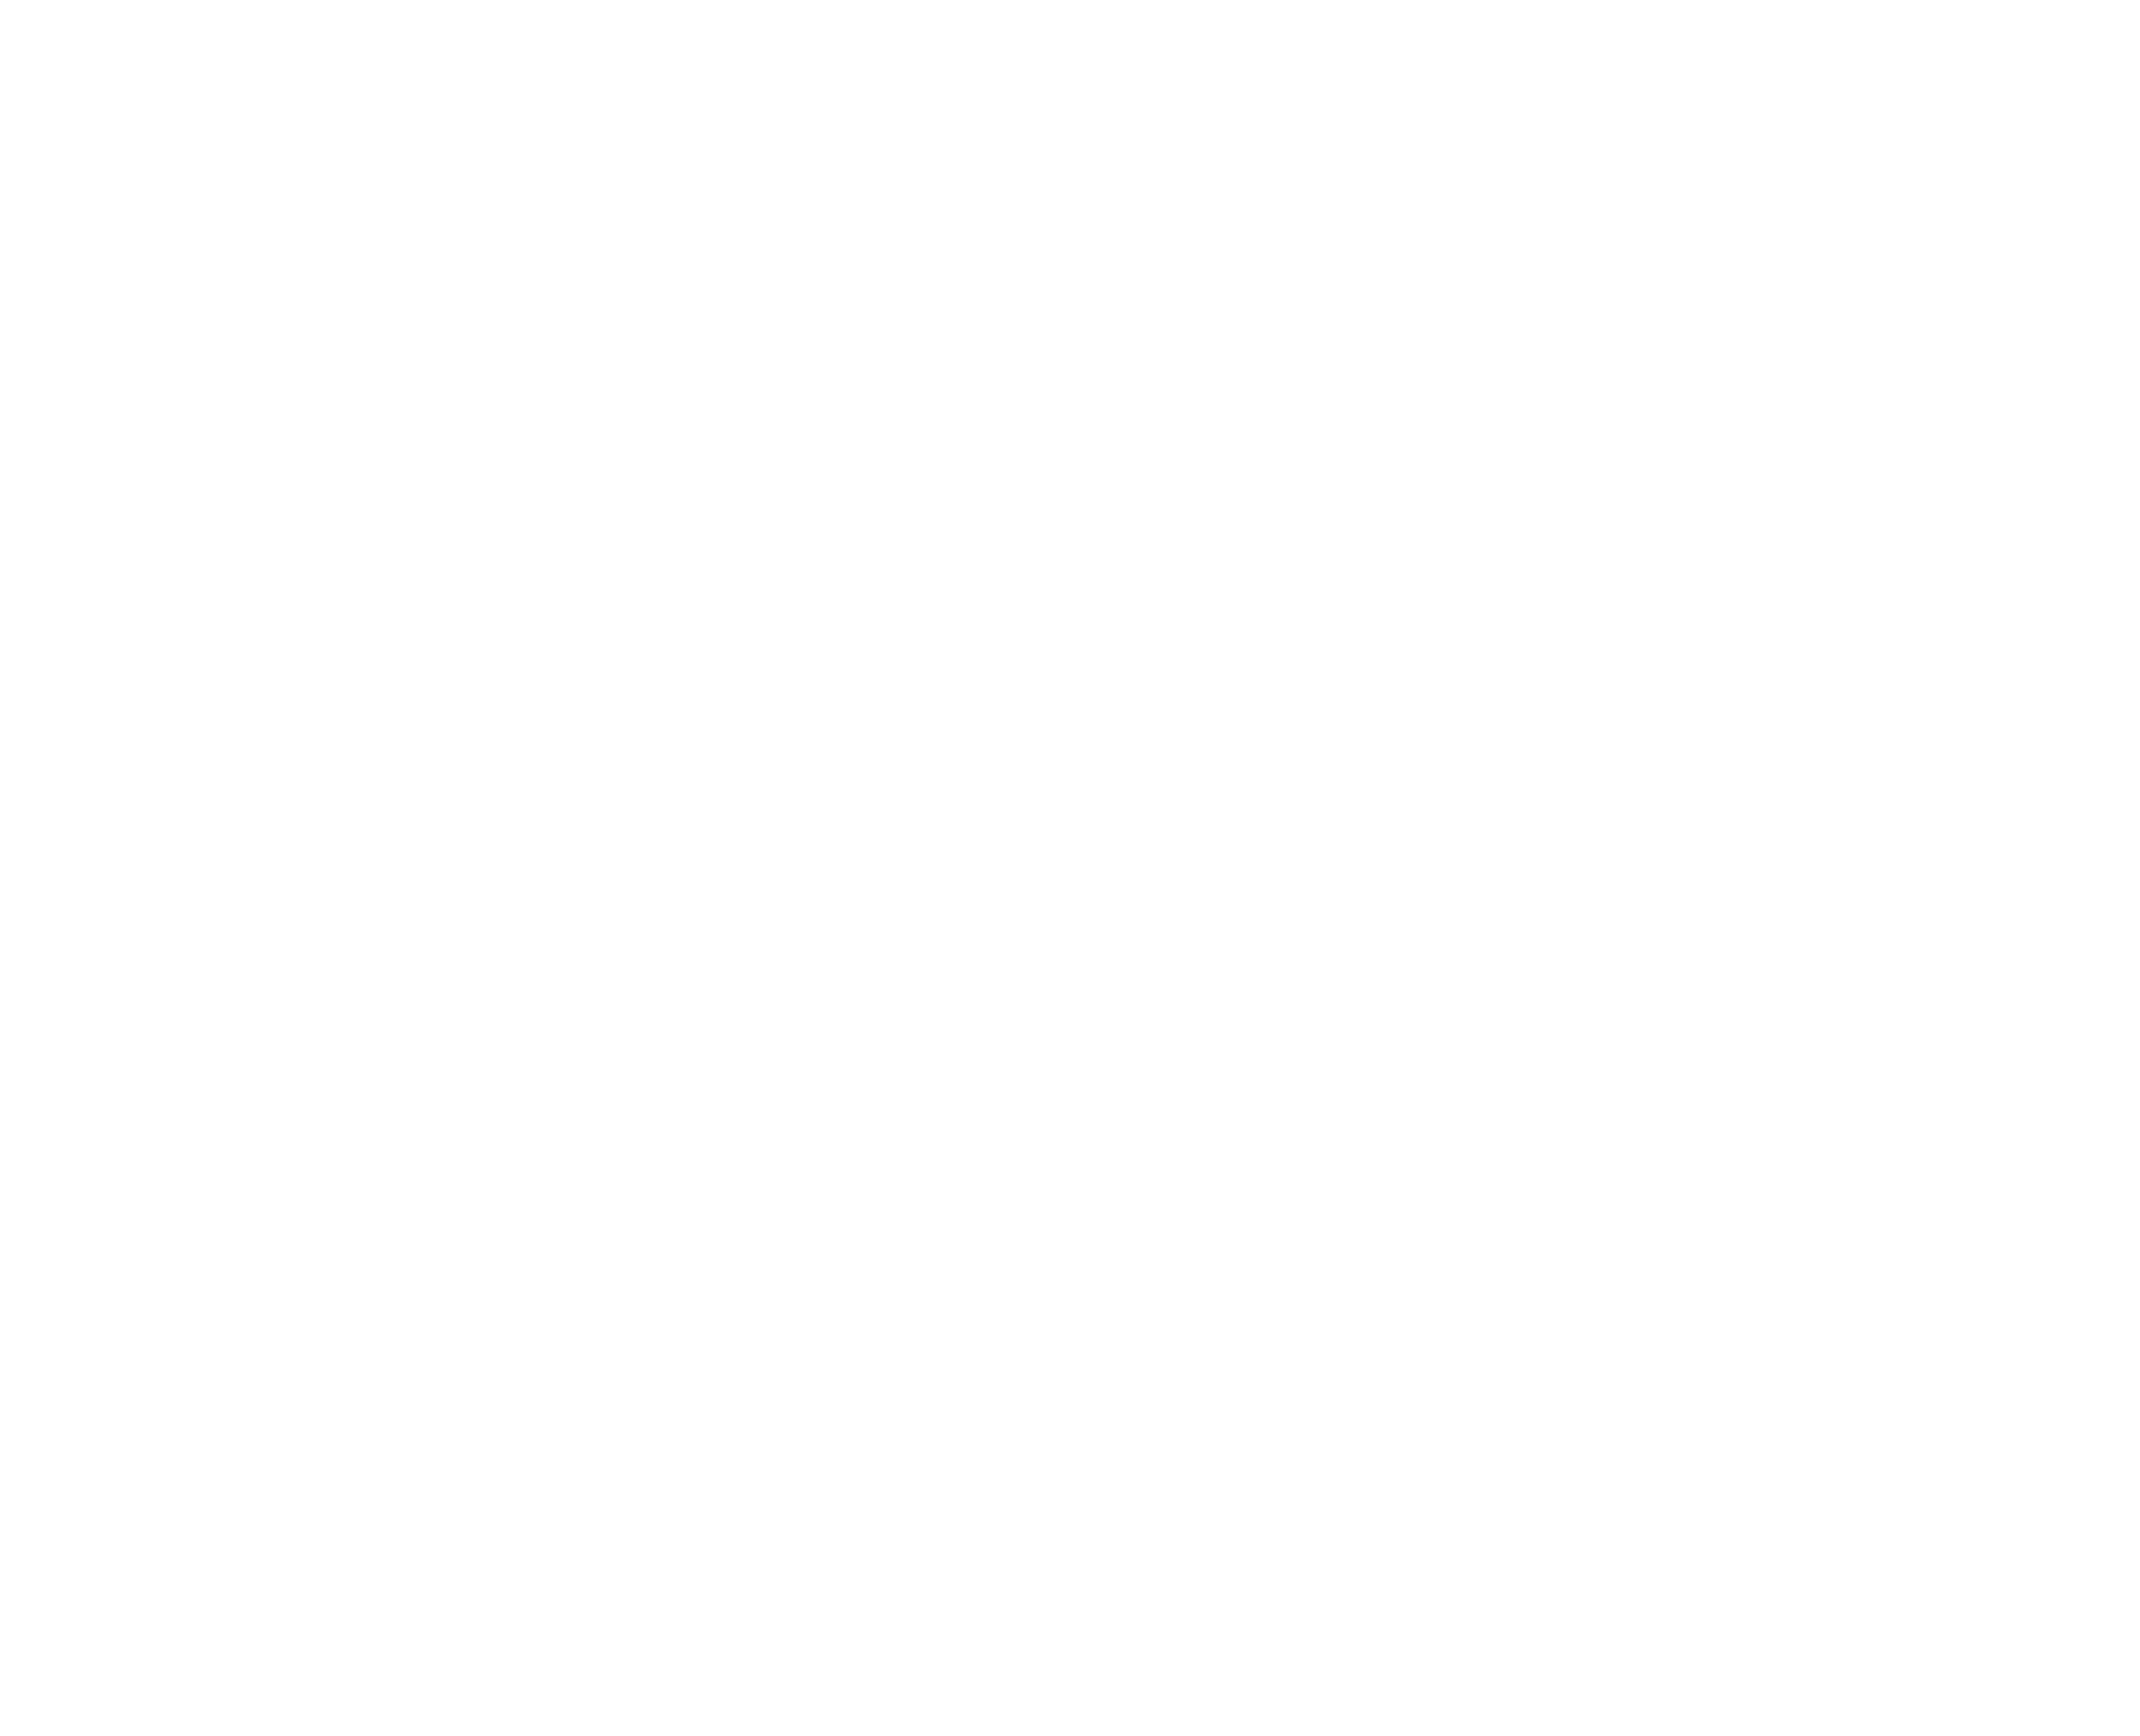 Assassin's Creed Odyssey Picture